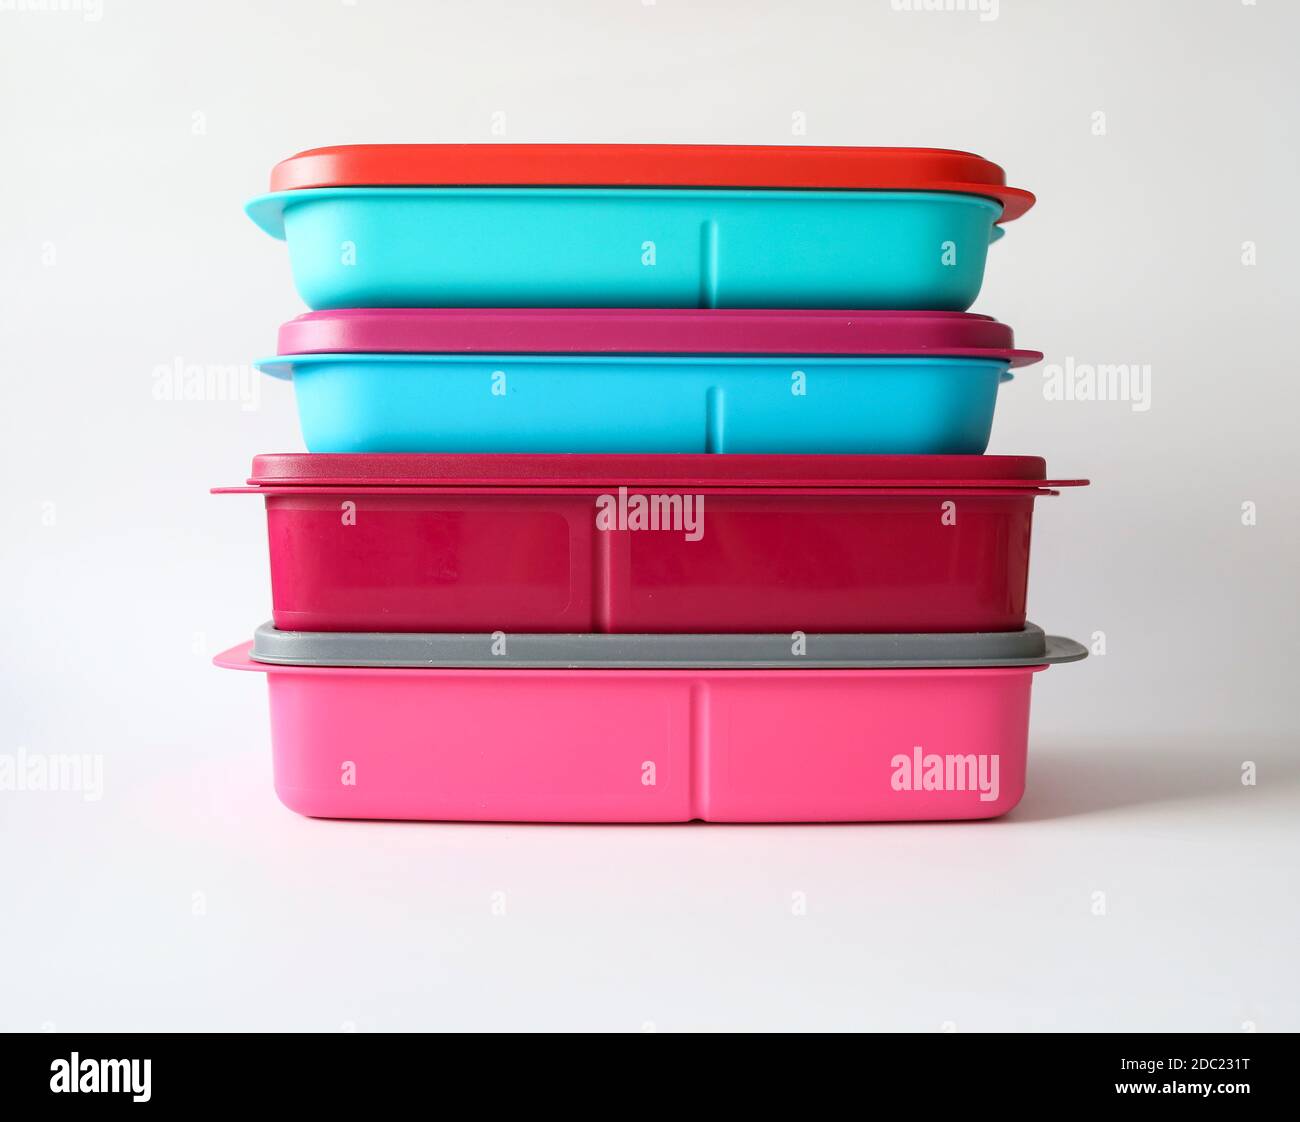 https://c8.alamy.com/comp/2DC231T/colorful-food-plastic-container-isolated-on-a-white-background-2DC231T.jpg